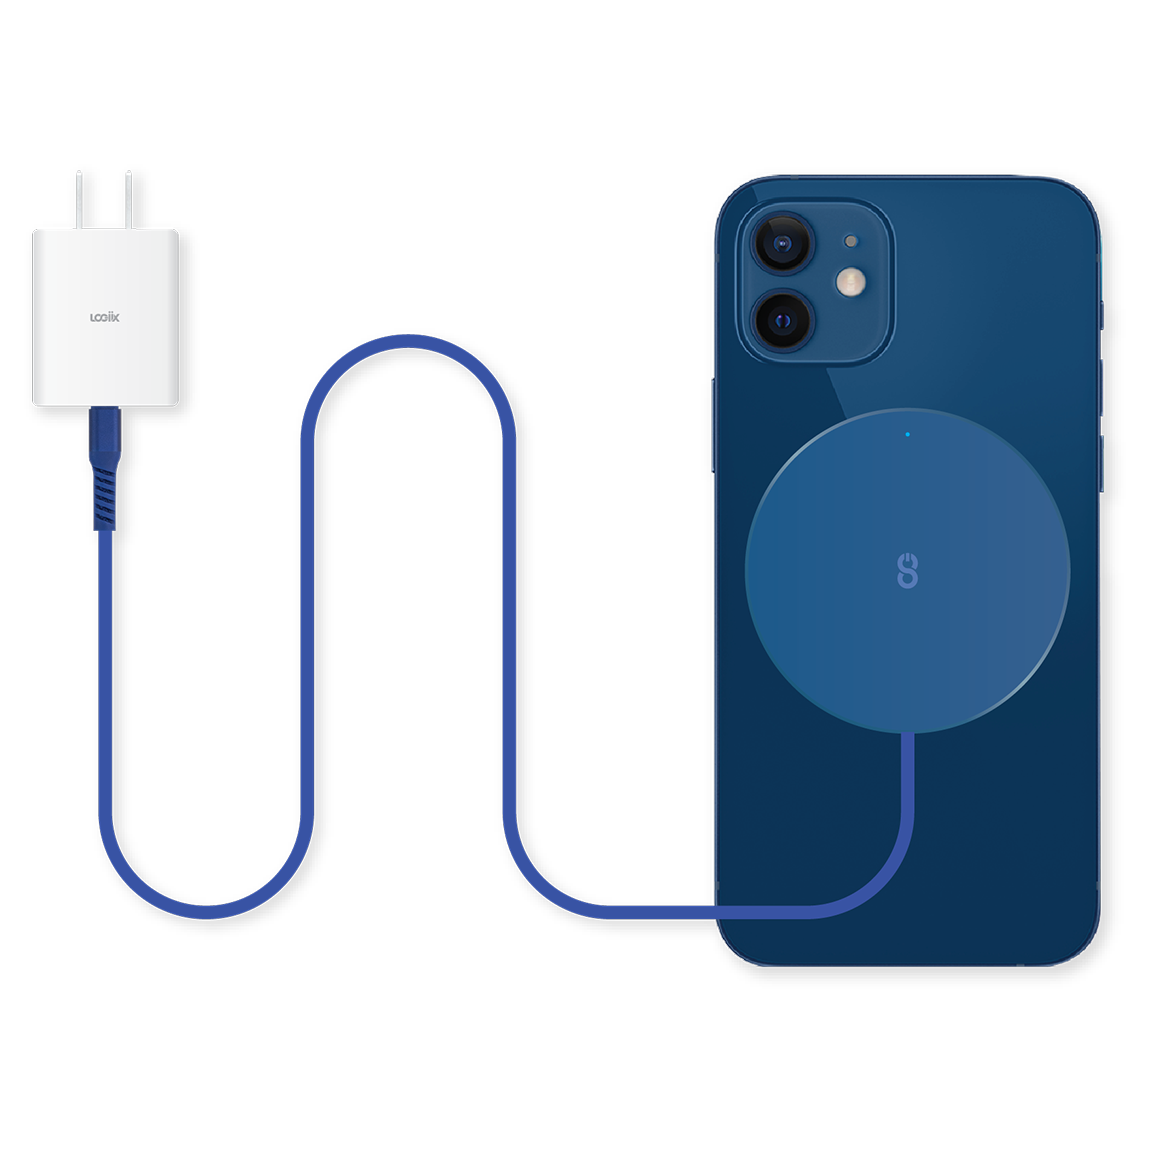 Blue MagSafe compatible fast-charging magnetic charger with built-in 1.5m USB-C cable charging a blue iPhone 12 